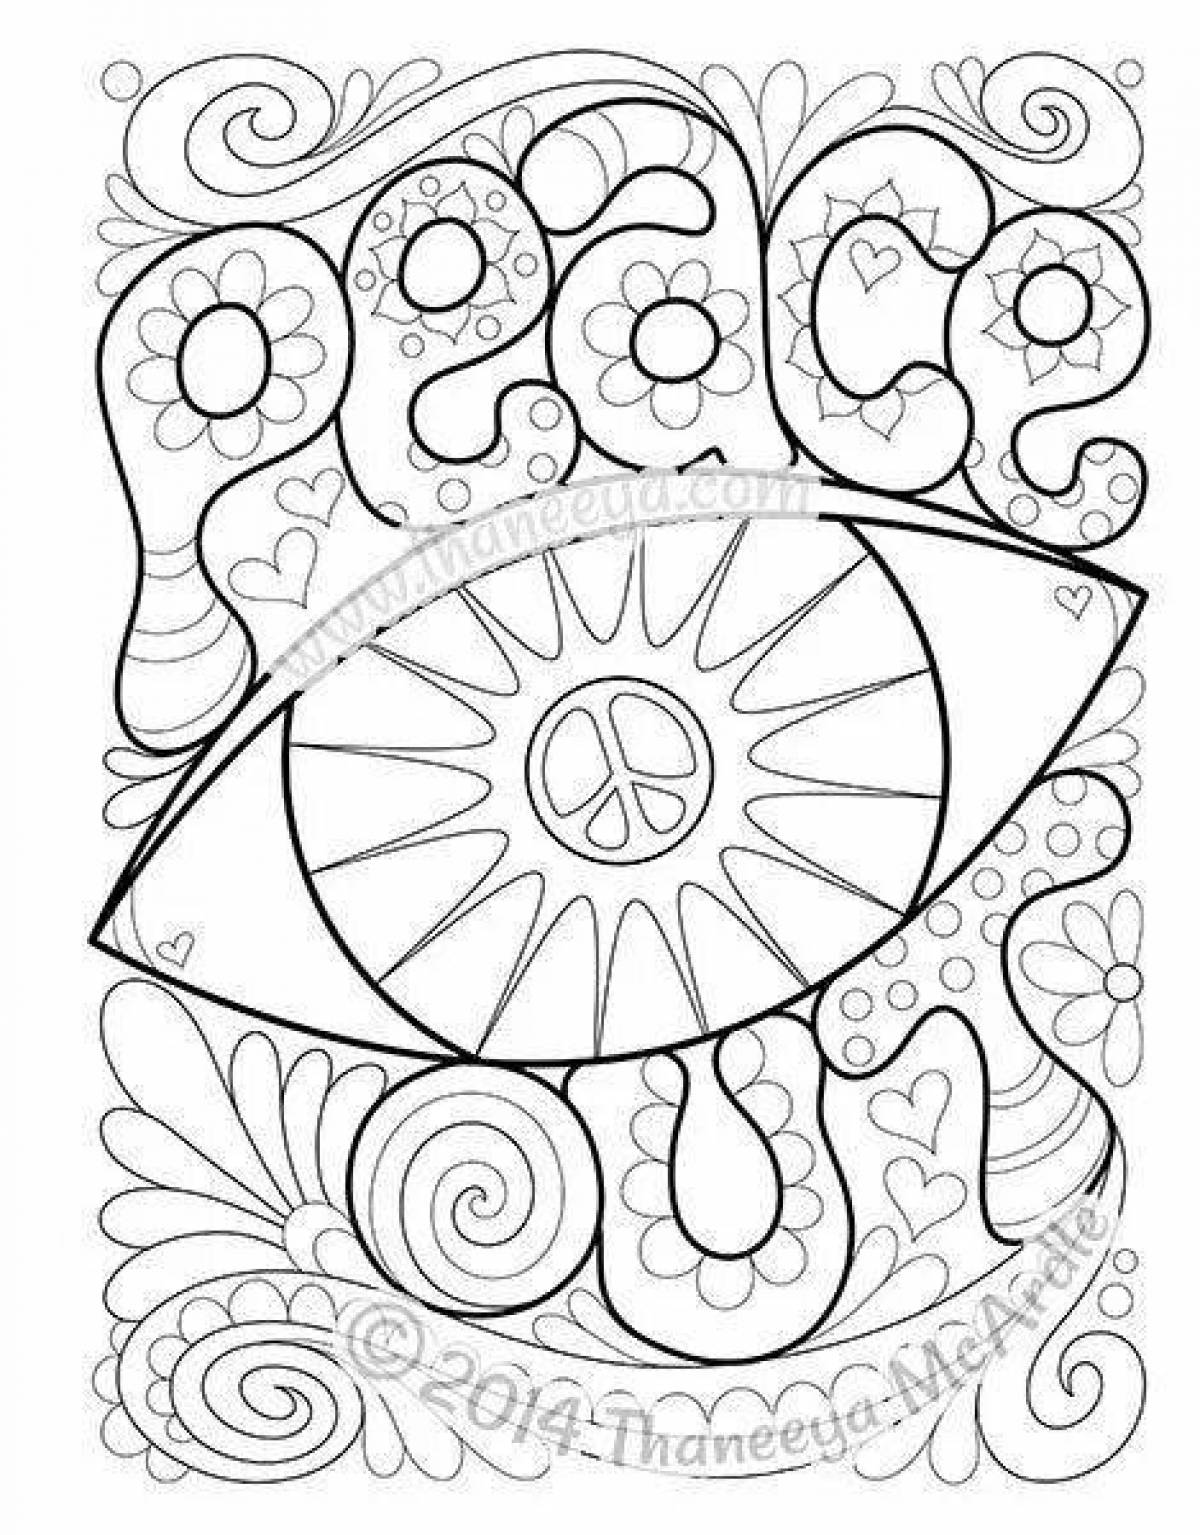 Hippie coloring page overflowing with colors